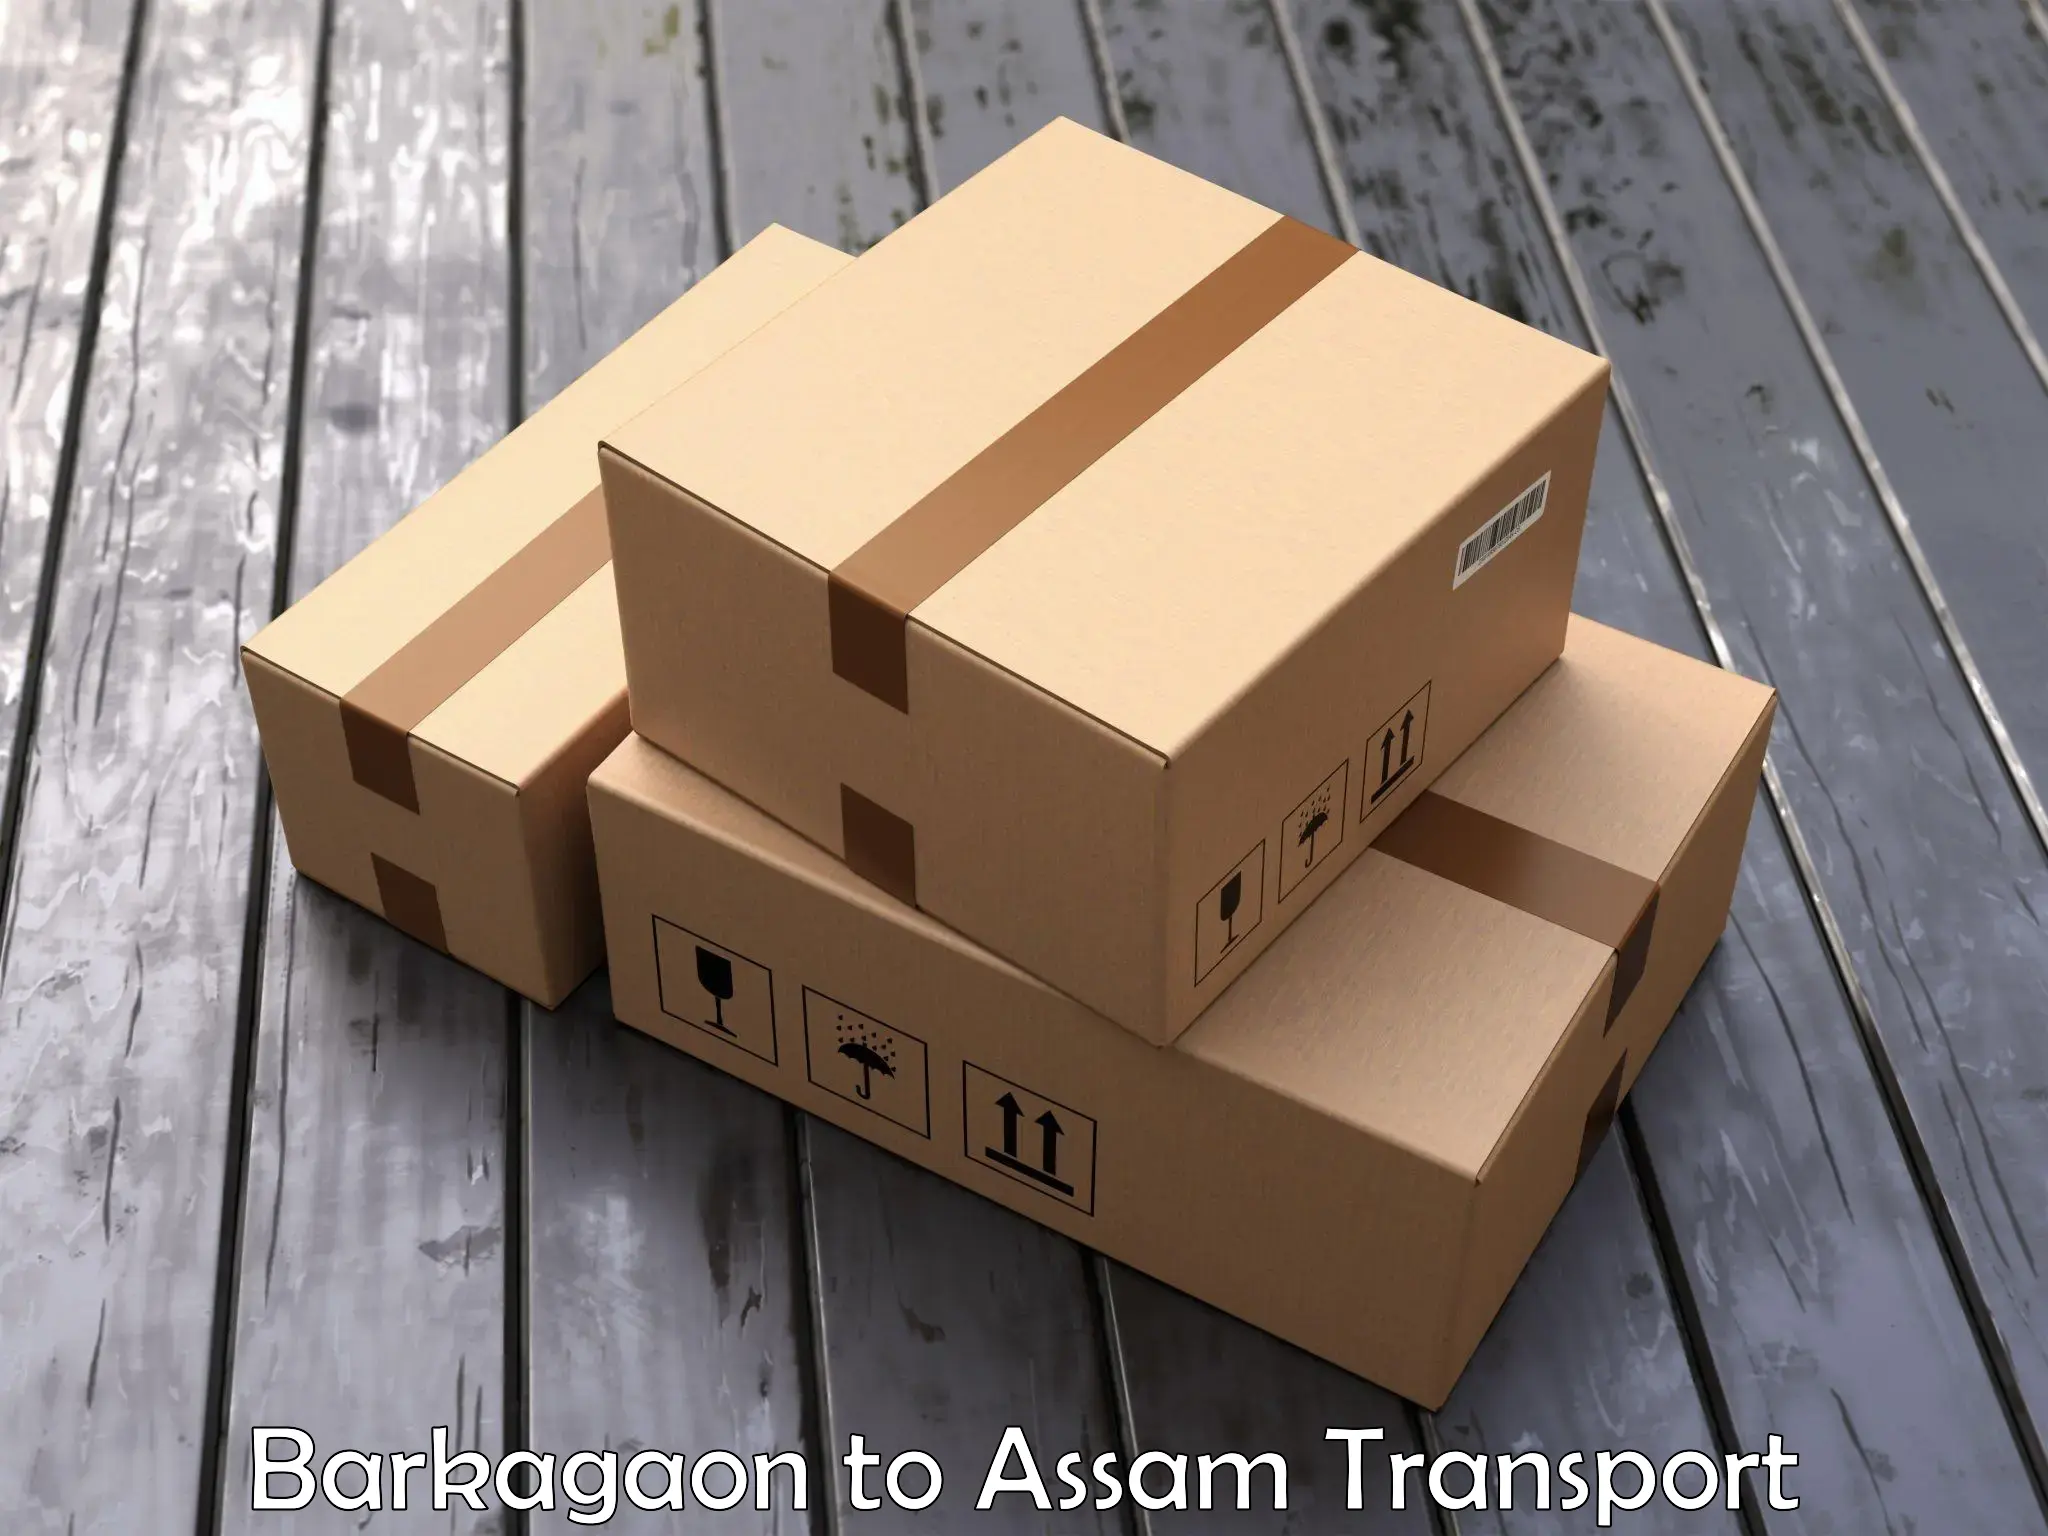 Daily parcel service transport Barkagaon to Duliajan